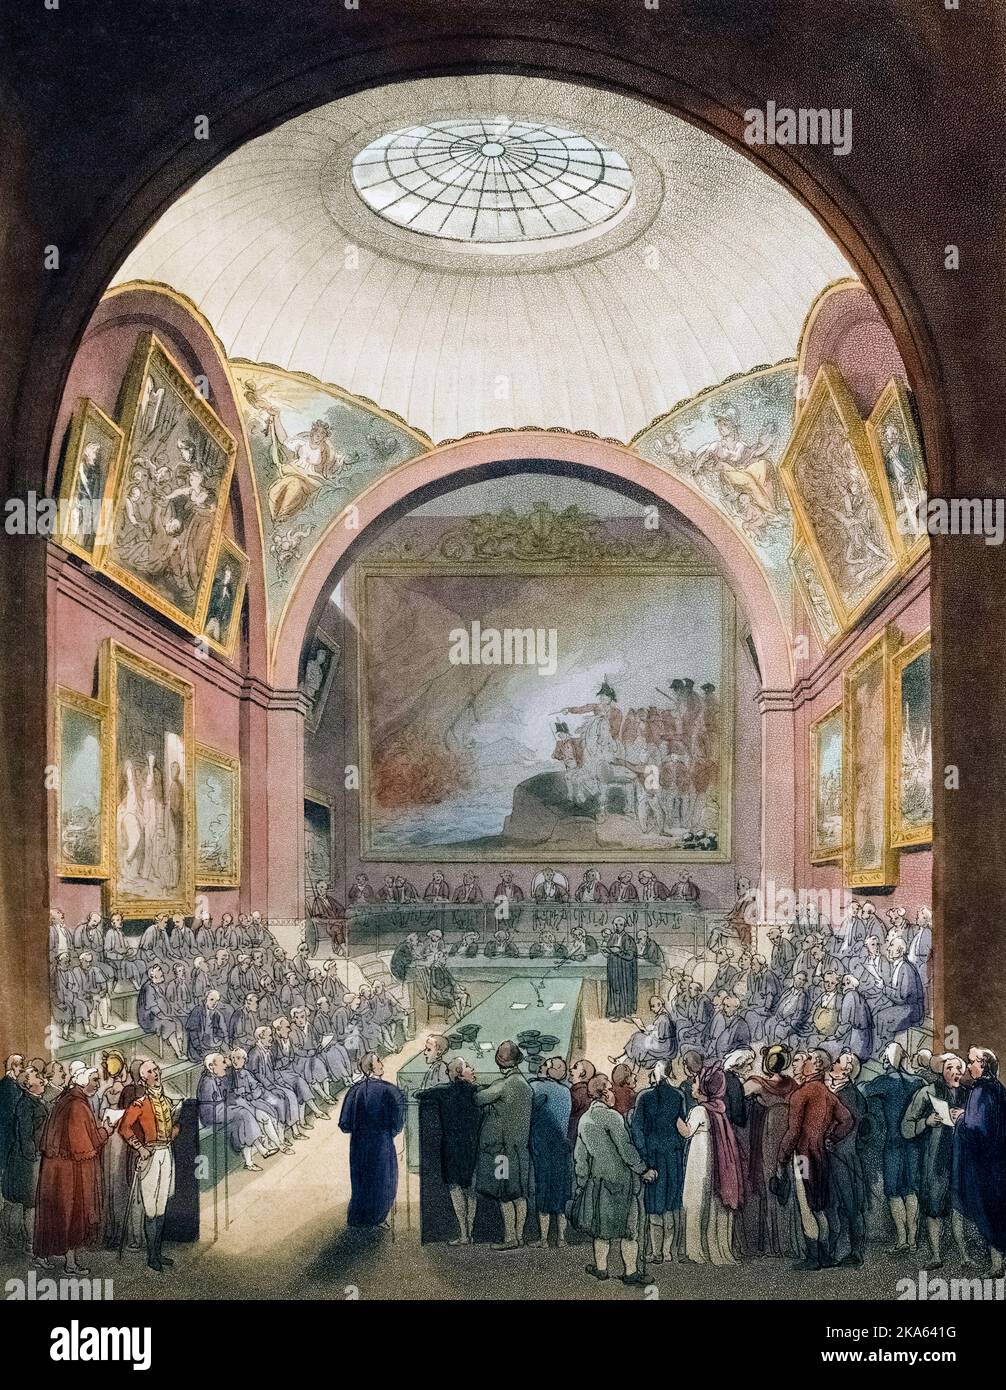 Common Council Chamber, Guildhall.  Circa 1808.  After a work by August Pugin and Thomas Rowlandson in the Microcosm of London, published in three volumes between 1808 and 1810 by Rudolph Ackermann.   Pugin was the artist responsible for the architectural elements in the Microcosm pictures; Thomas Rowlandson was hired to add the lively human figures. Stock Photo